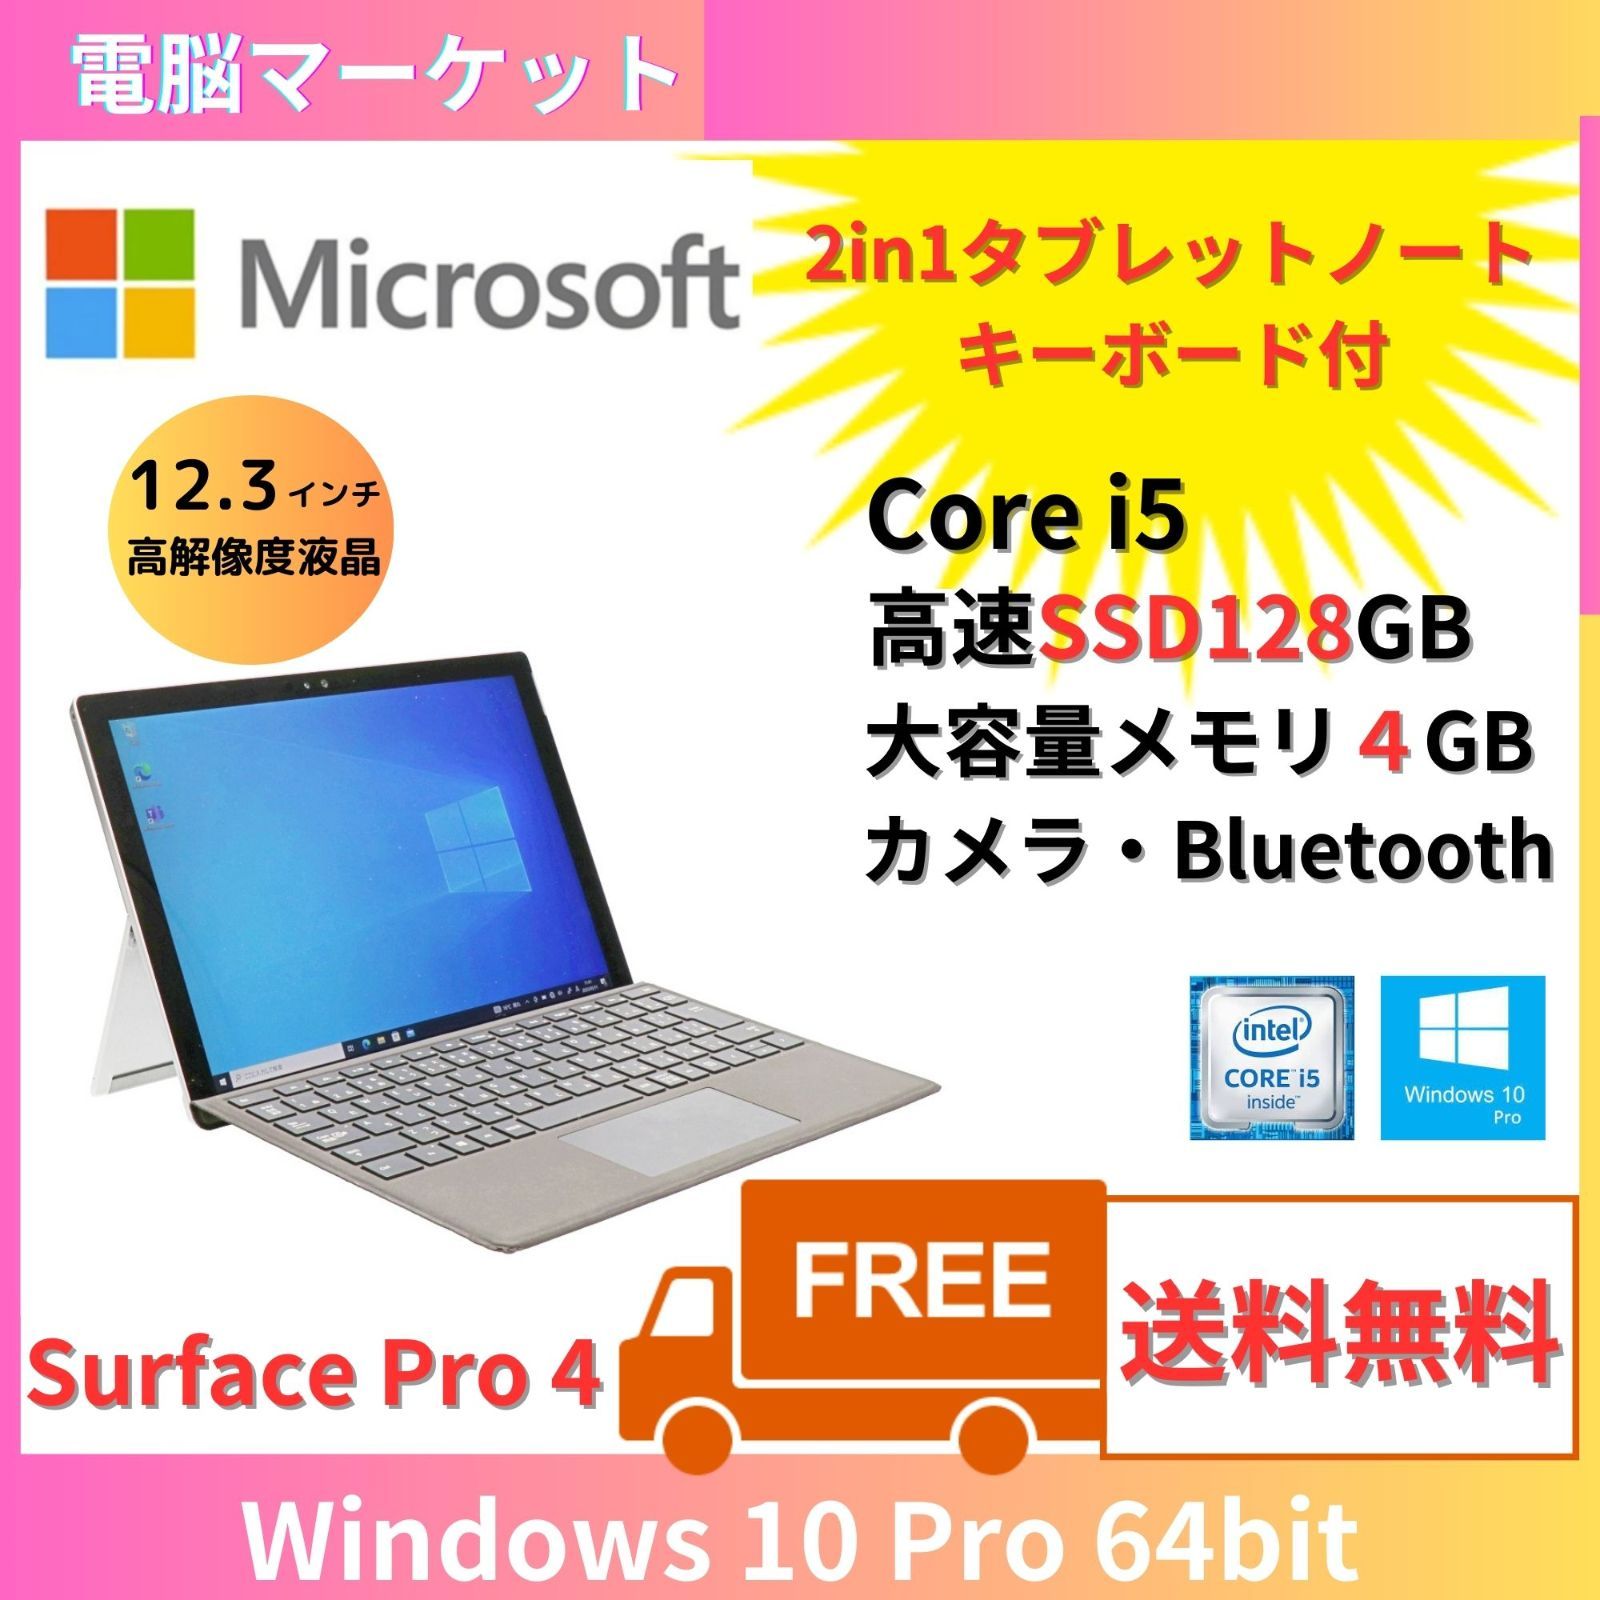 surface pro4♪爆速SSD♪タブレットPC♪2in1♪カメラつき